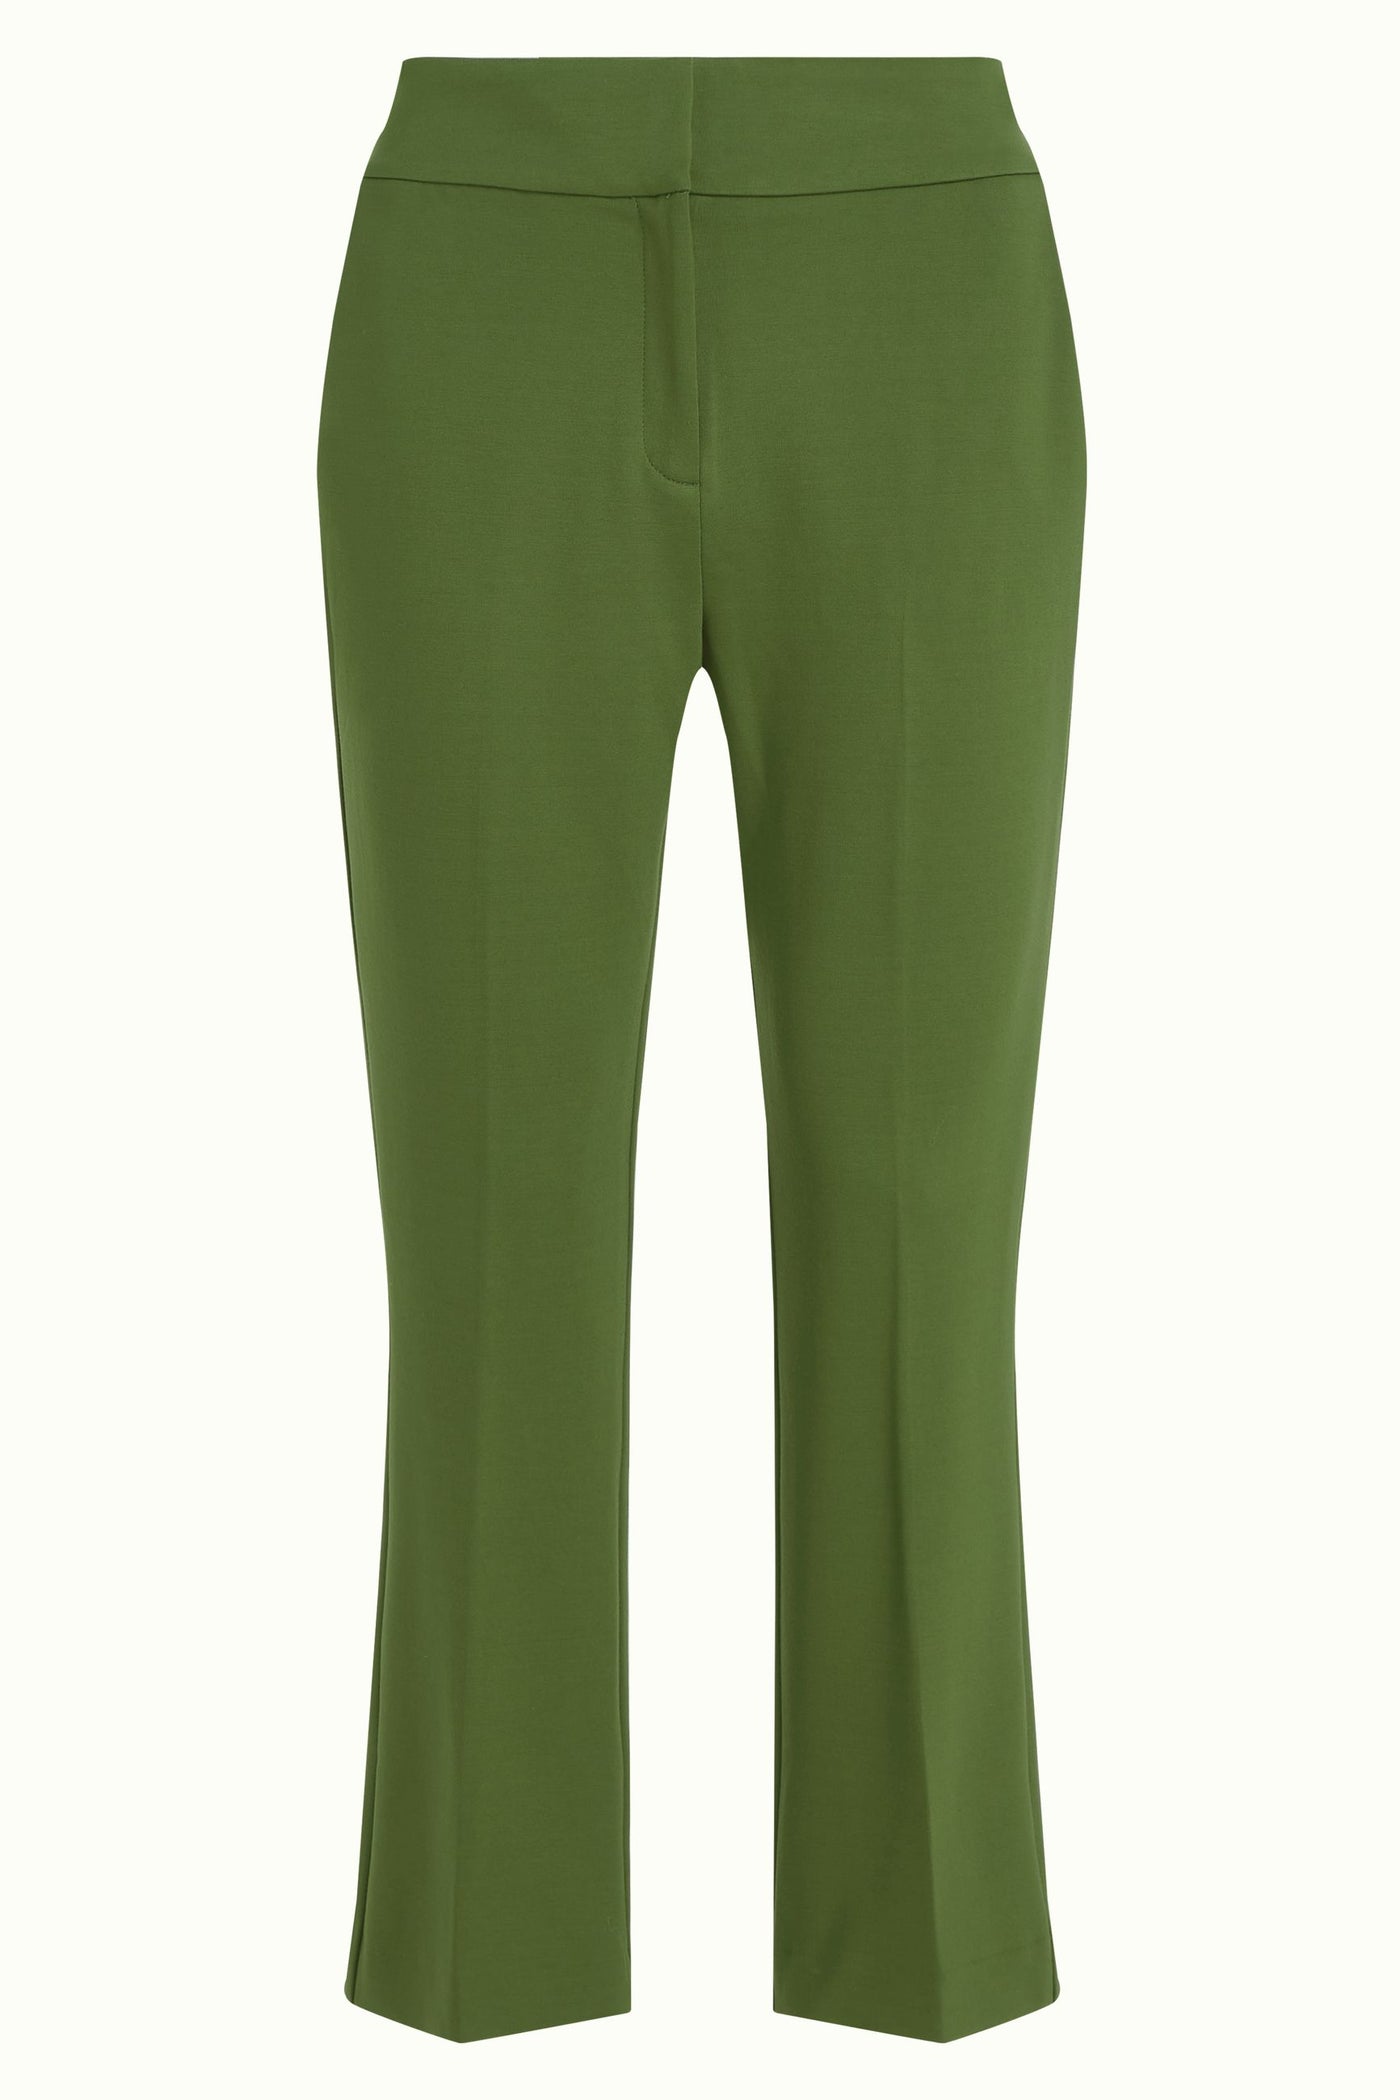 King Louie Jenny Pants Uni Rodeo Olive Green #farve_olive-green